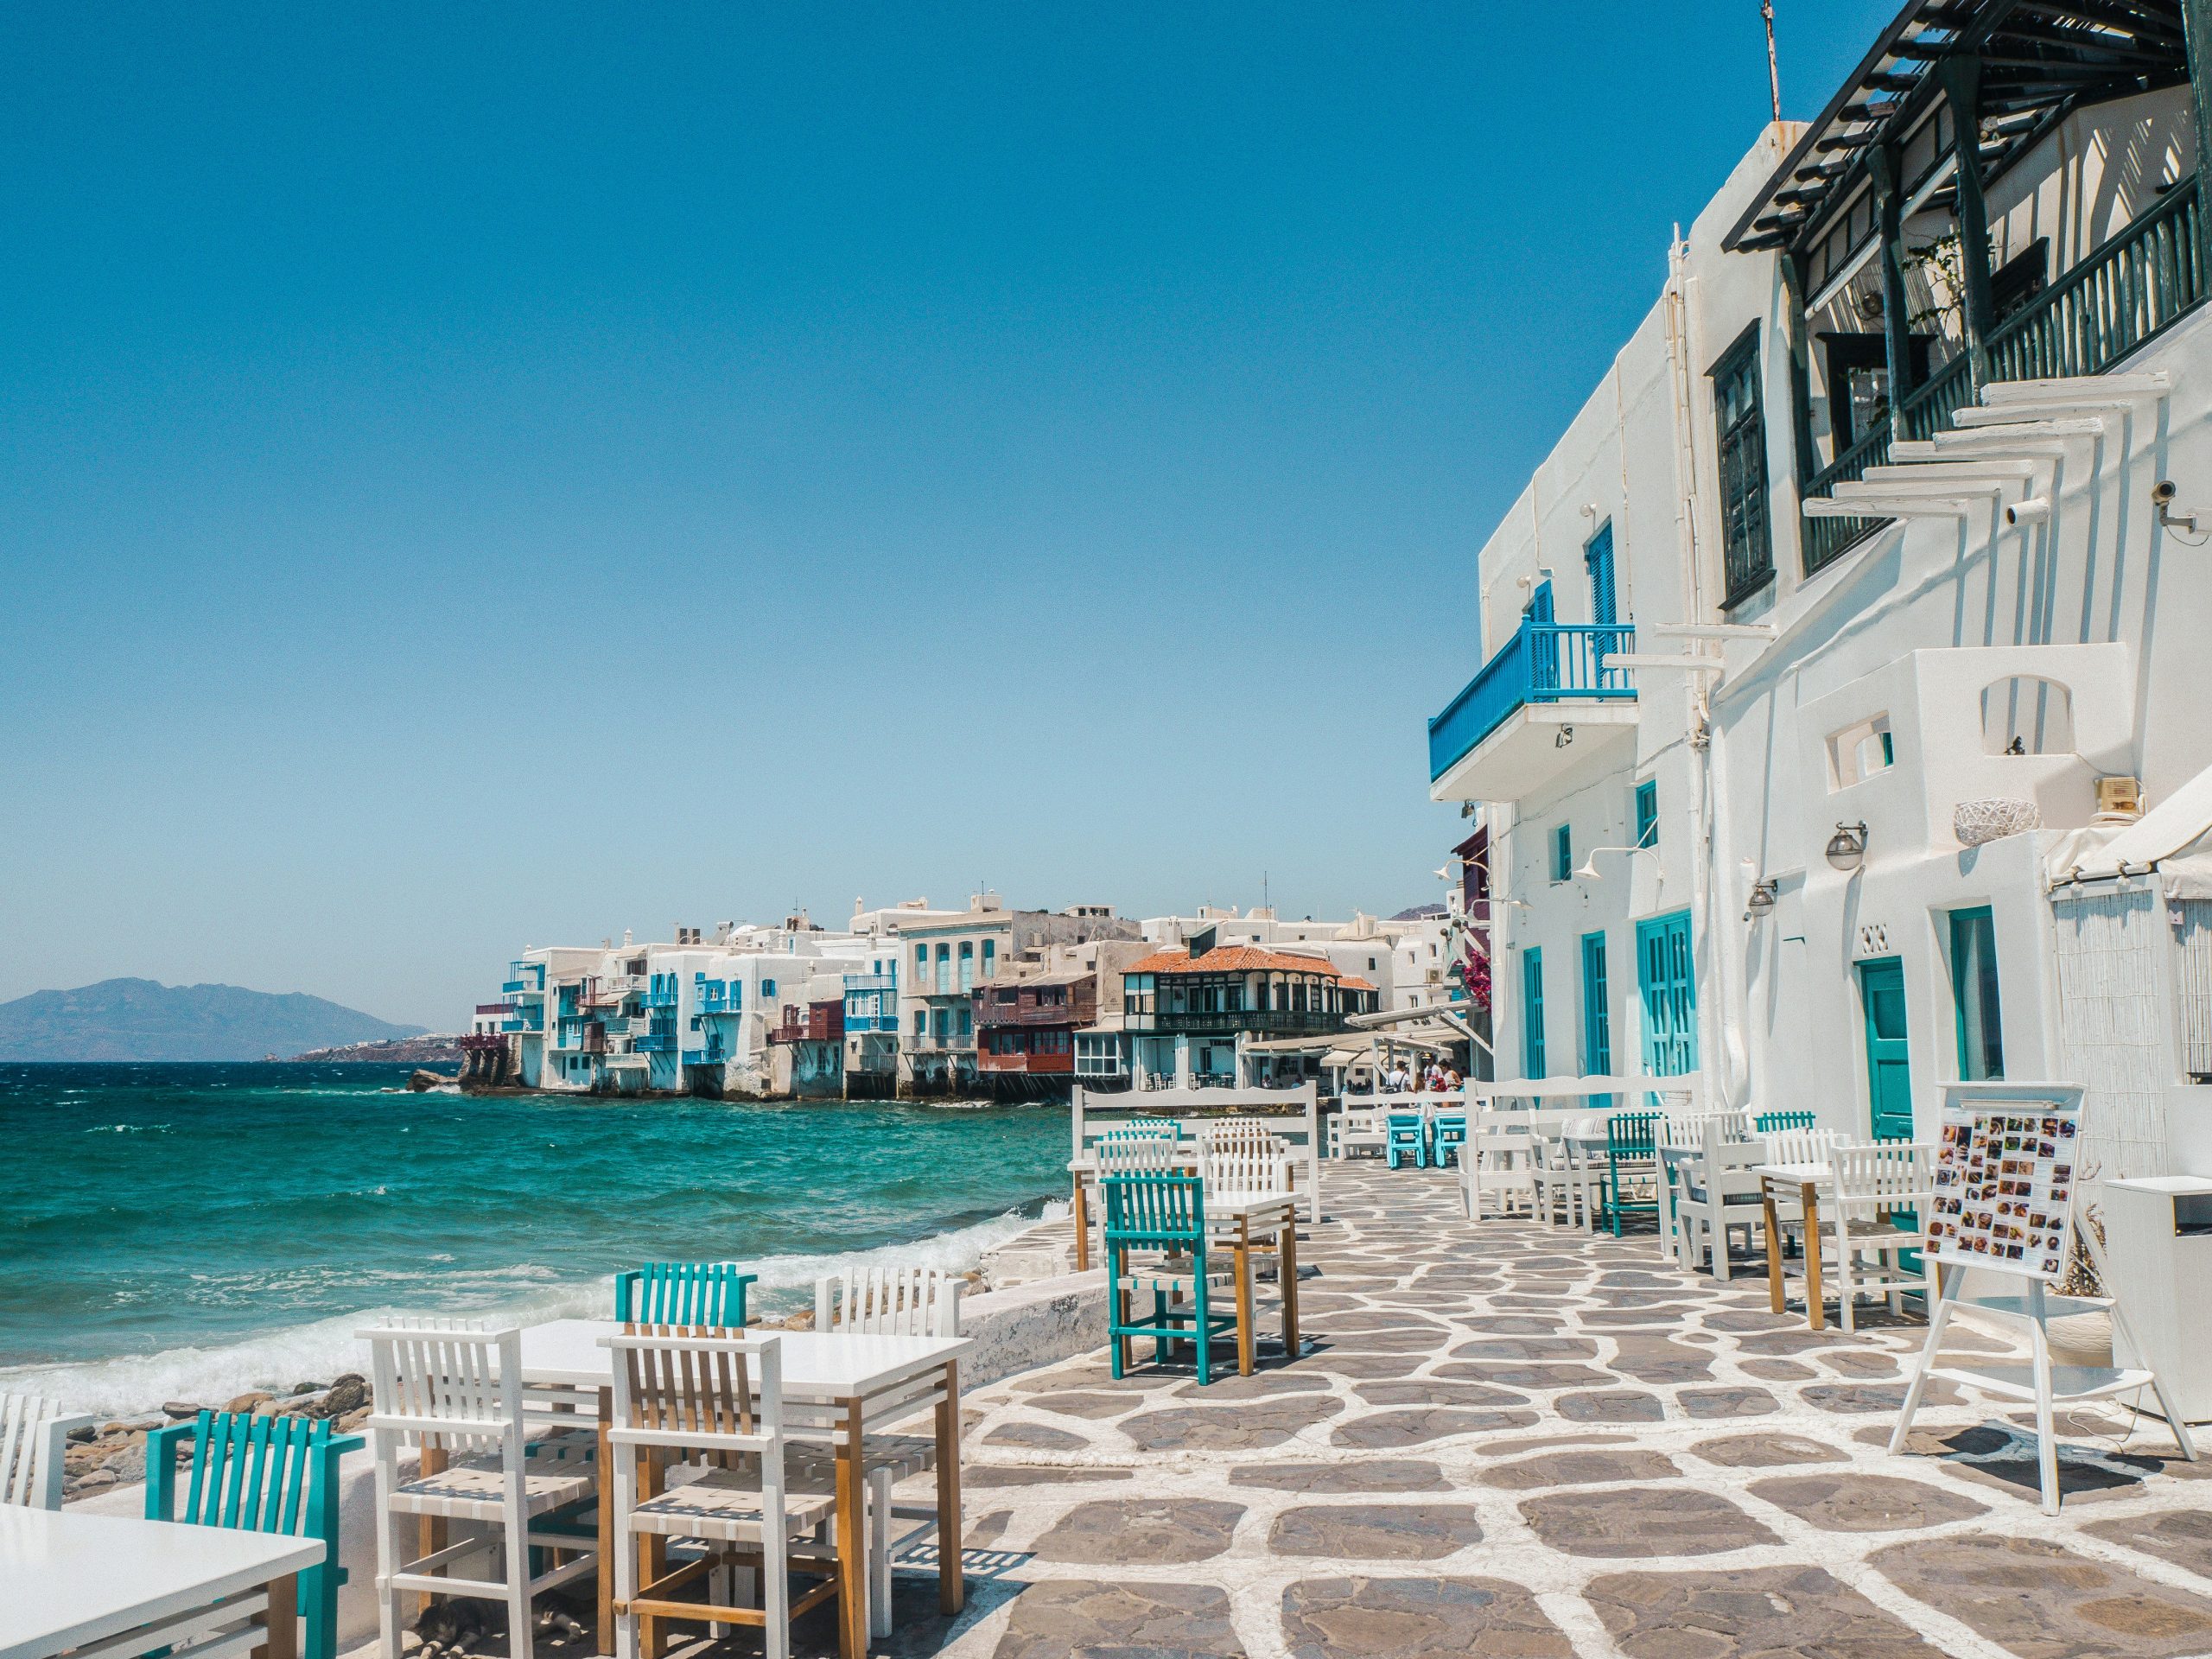 explore the stunning cyclades islands and discover the beauty of the aegean sea with its charming towns, white-washed buildings, and picturesque beaches.